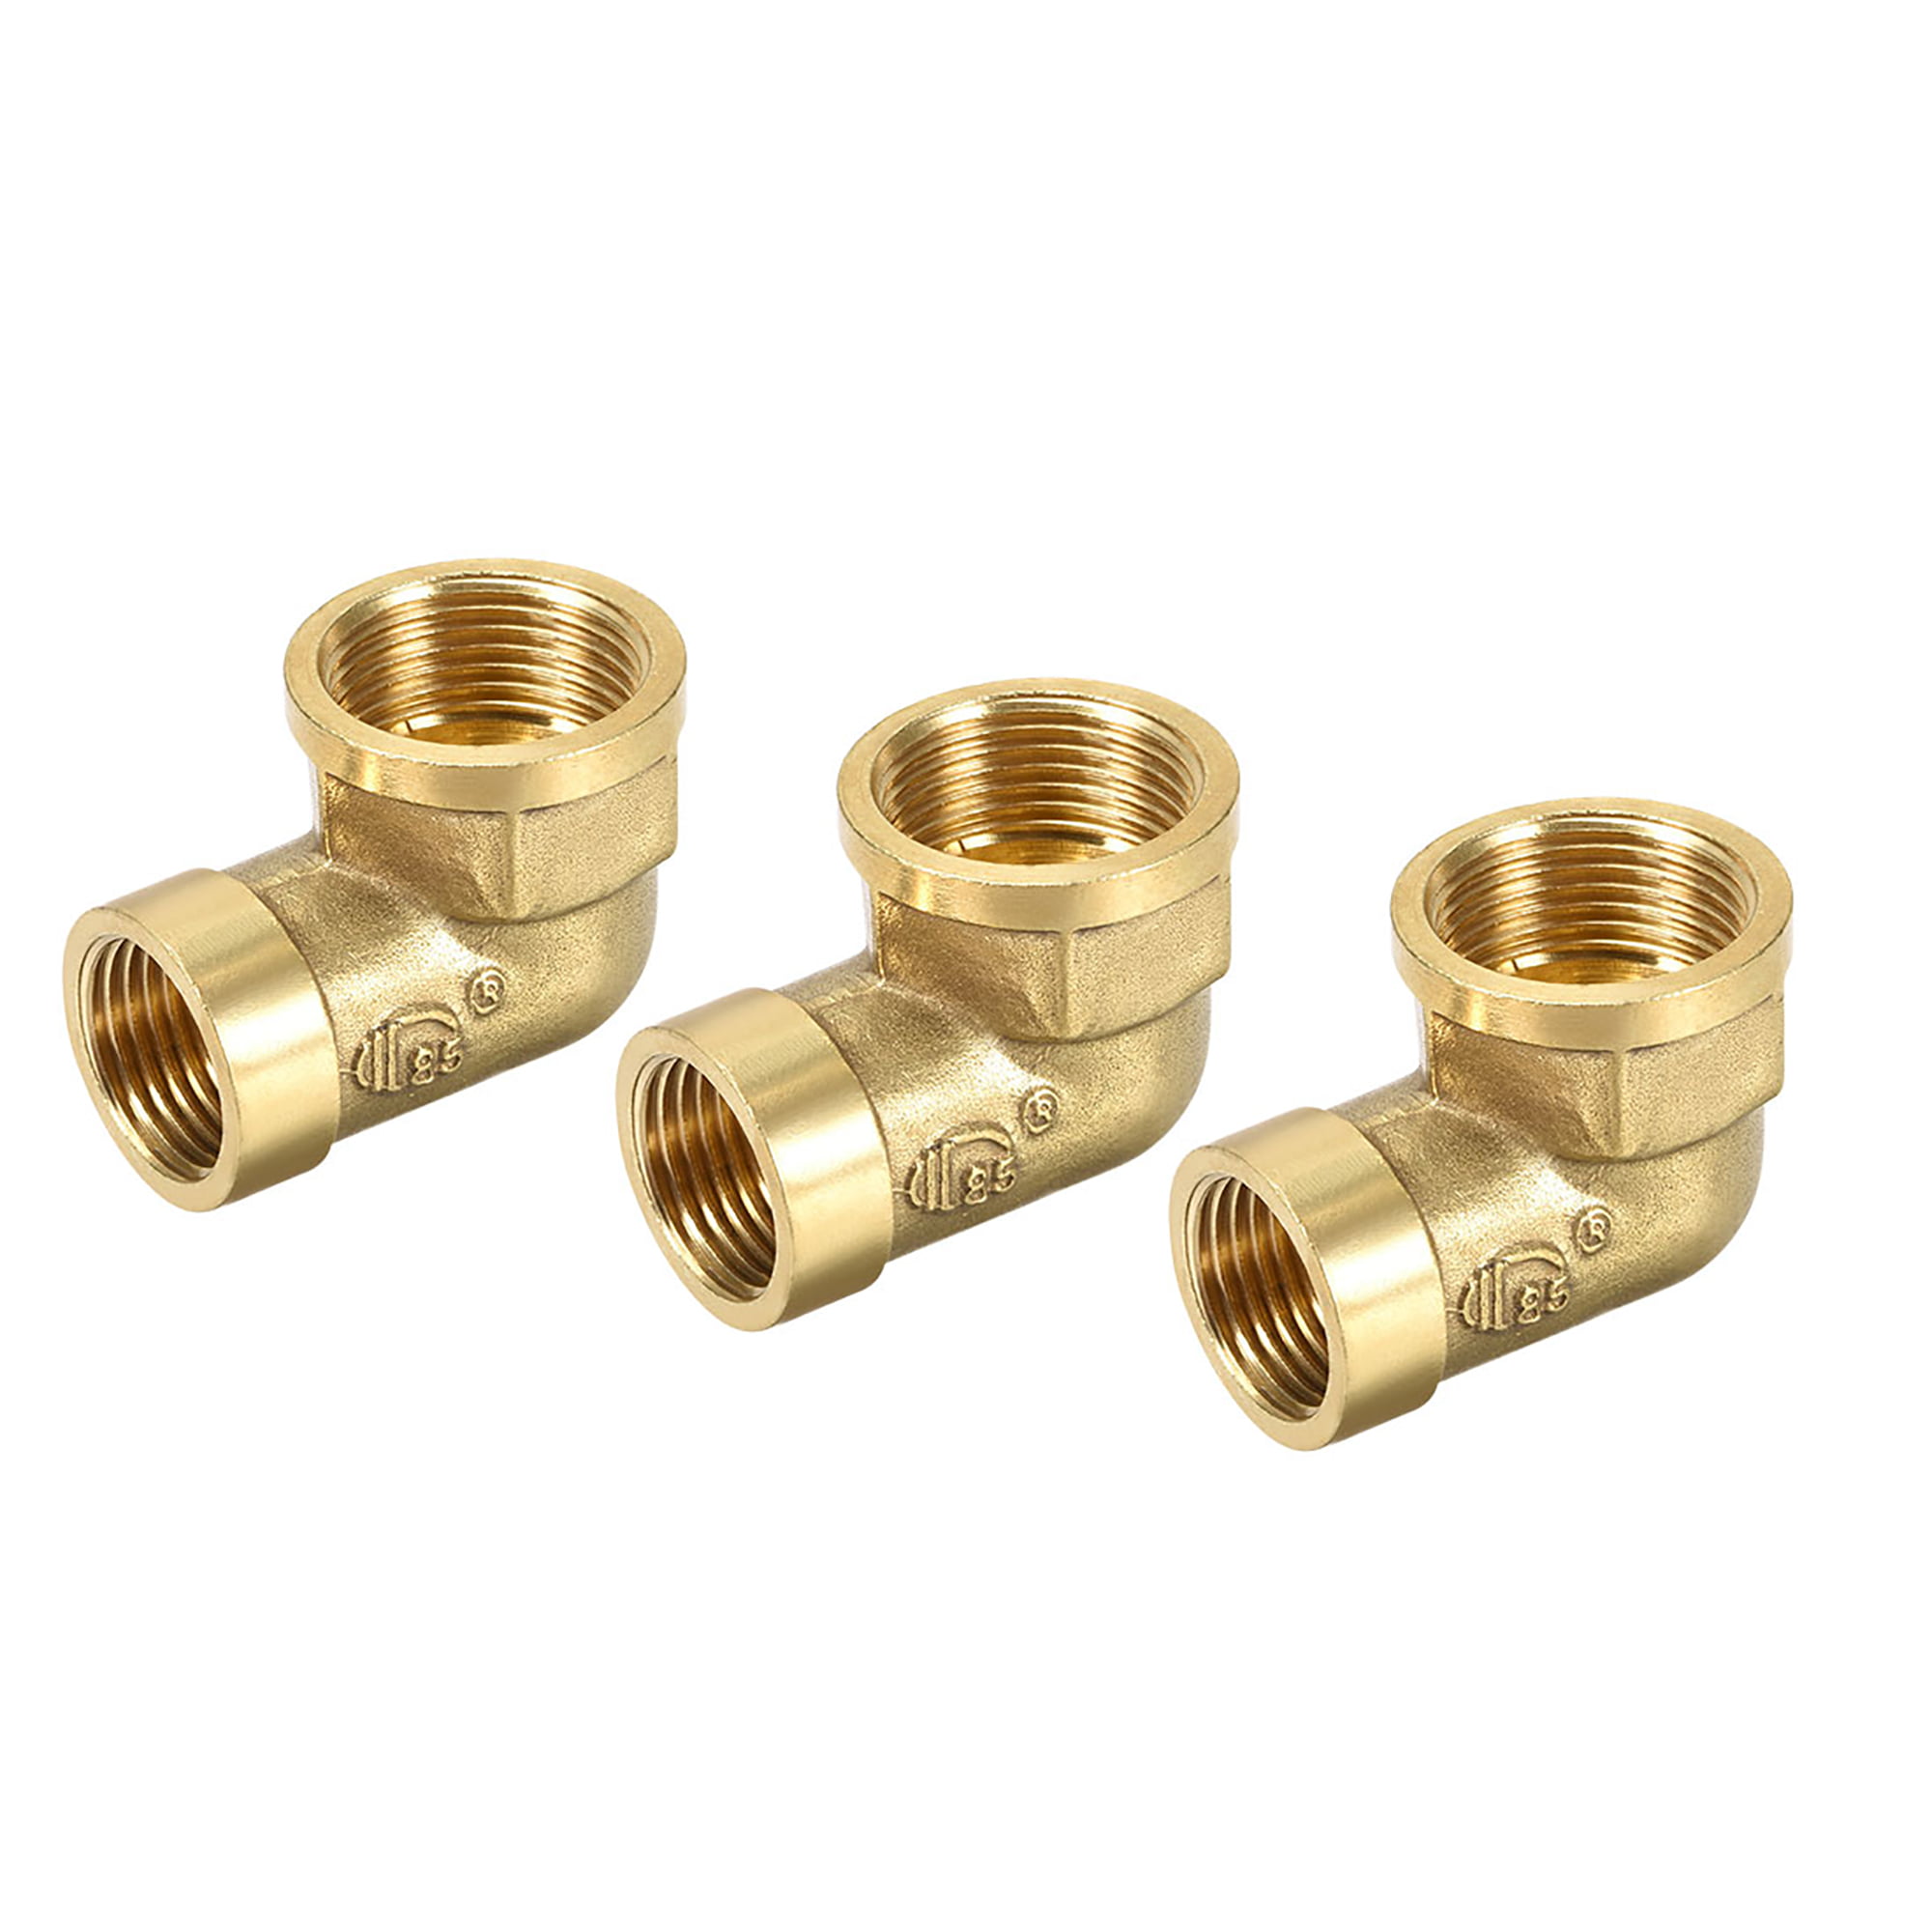 Brass Water Gas Pipe Elbow Adapter Connector1/2" 3/4"Male/Female Thread Fittings 